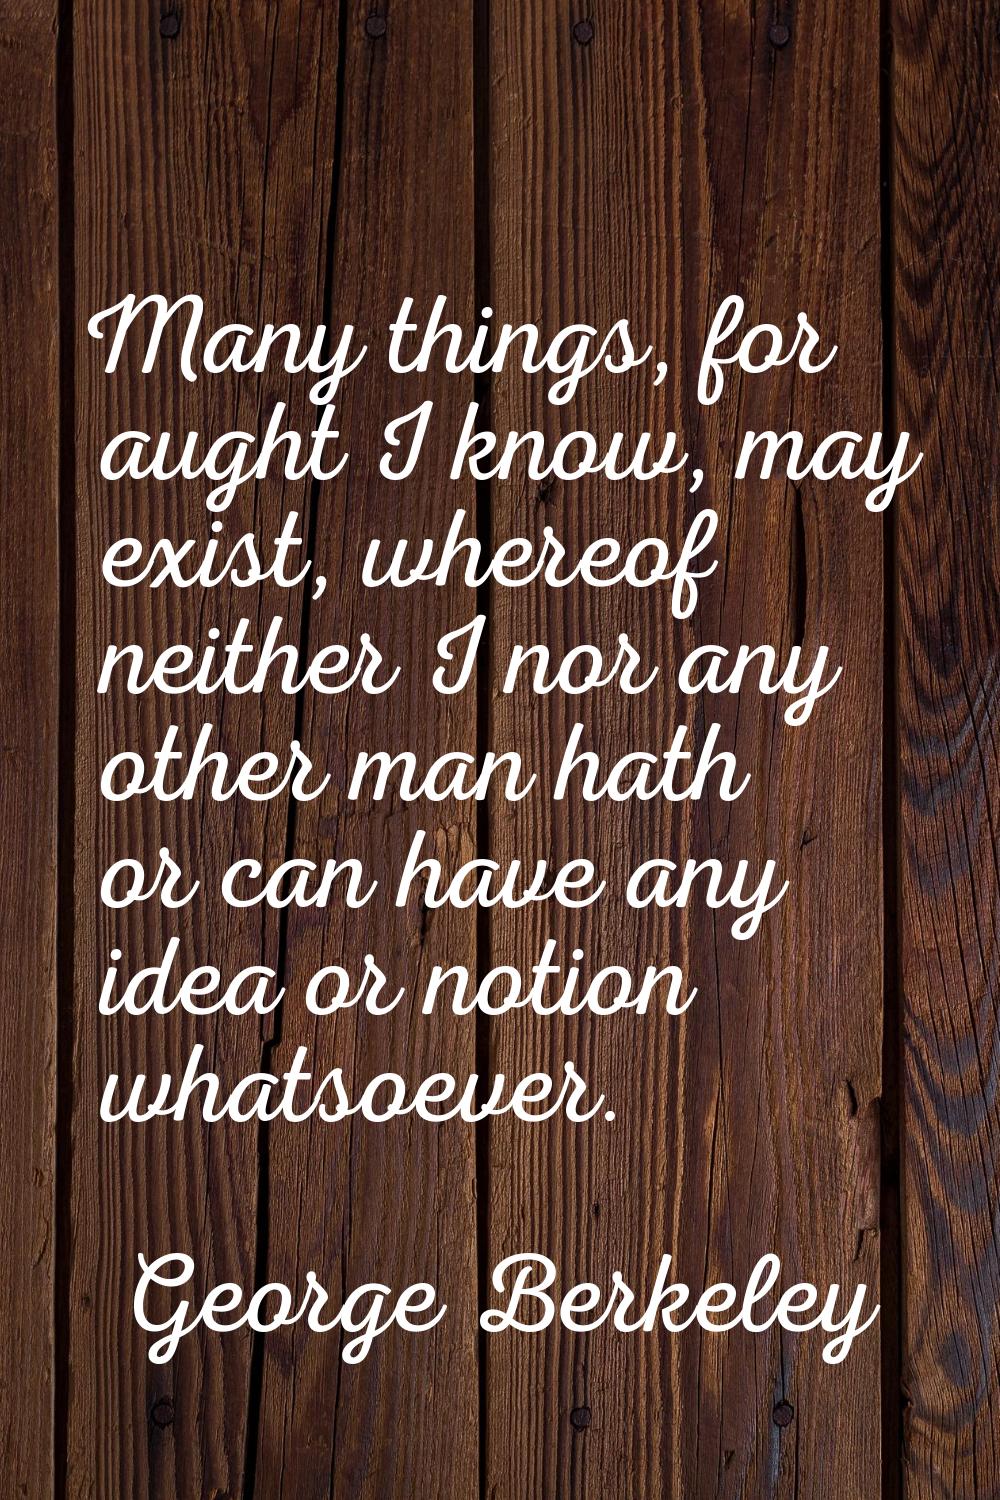 Many things, for aught I know, may exist, whereof neither I nor any other man hath or can have any 